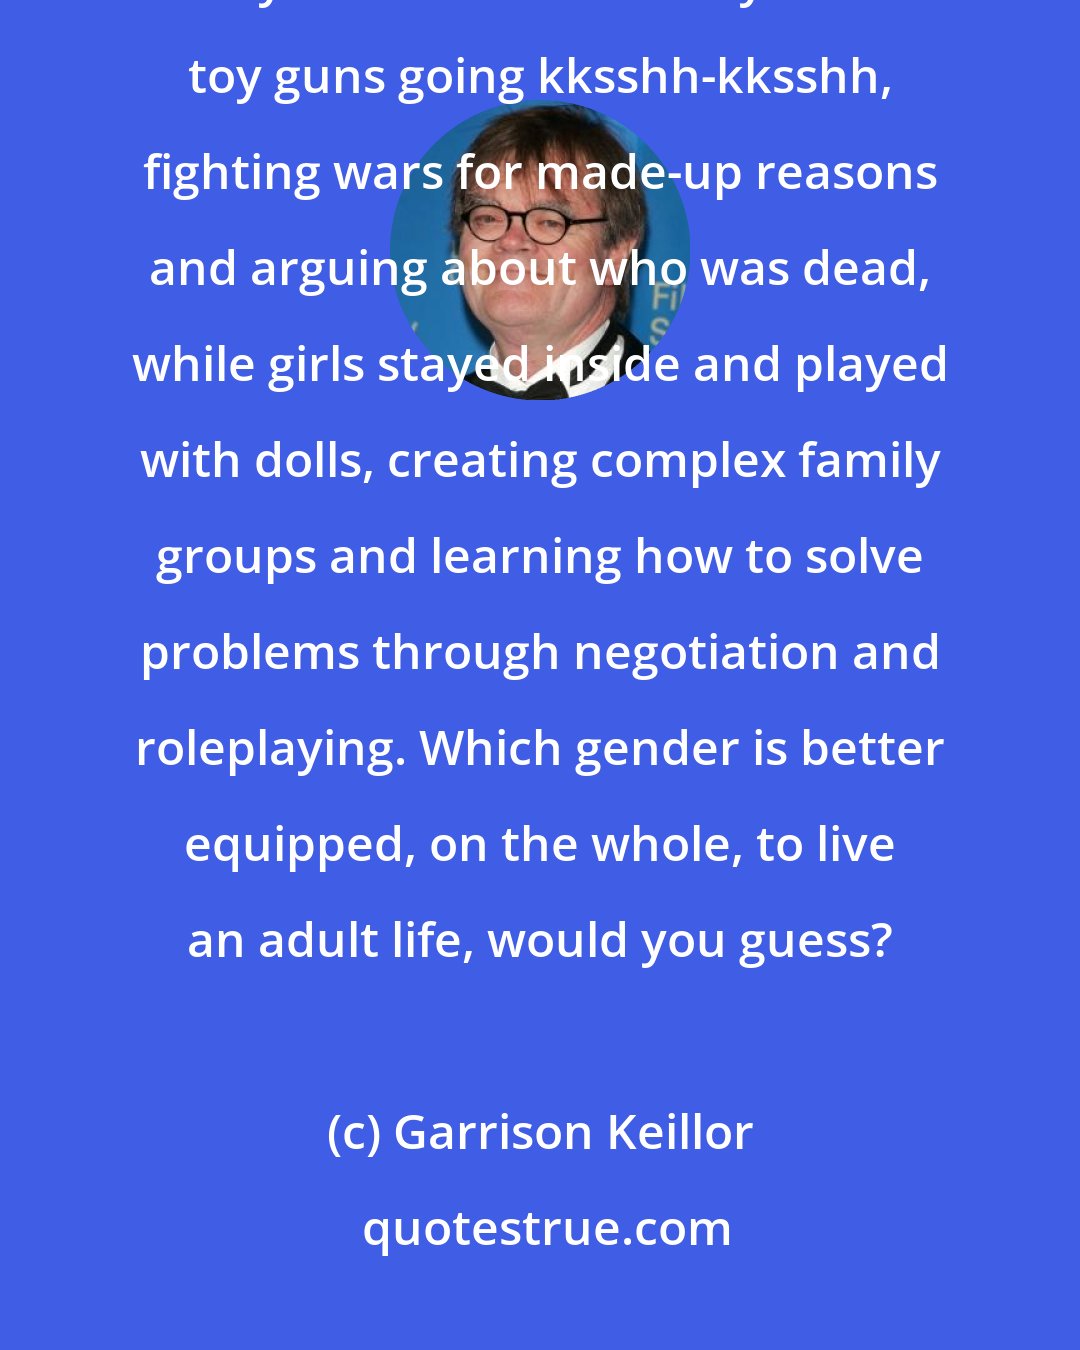 Garrison Keillor: Girls . . . were allowed to play in the house . . . and boys were sent outdoors. . . . Boys ran around in the yard with toy guns going kksshh-kksshh, fighting wars for made-up reasons and arguing about who was dead, while girls stayed inside and played with dolls, creating complex family groups and learning how to solve problems through negotiation and roleplaying. Which gender is better equipped, on the whole, to live an adult life, would you guess?